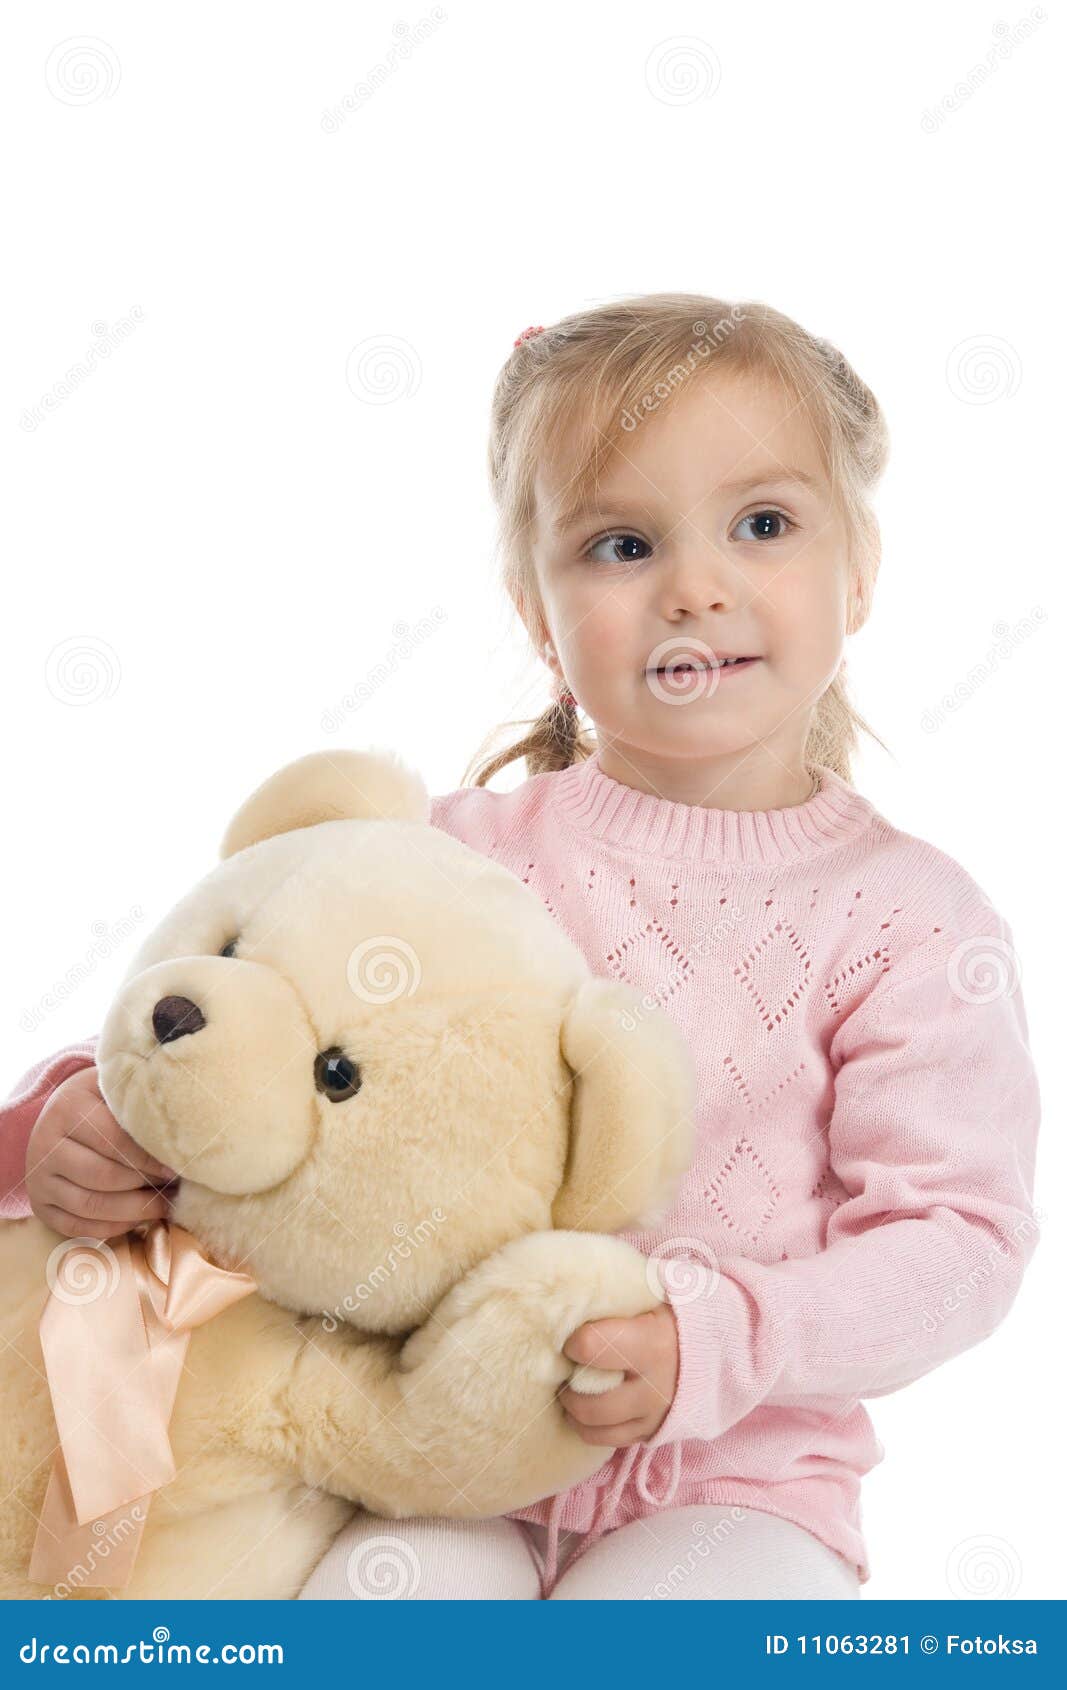 Little Girl Holding a Teddy Bear Stock Image - Image of teddy, smiles ...